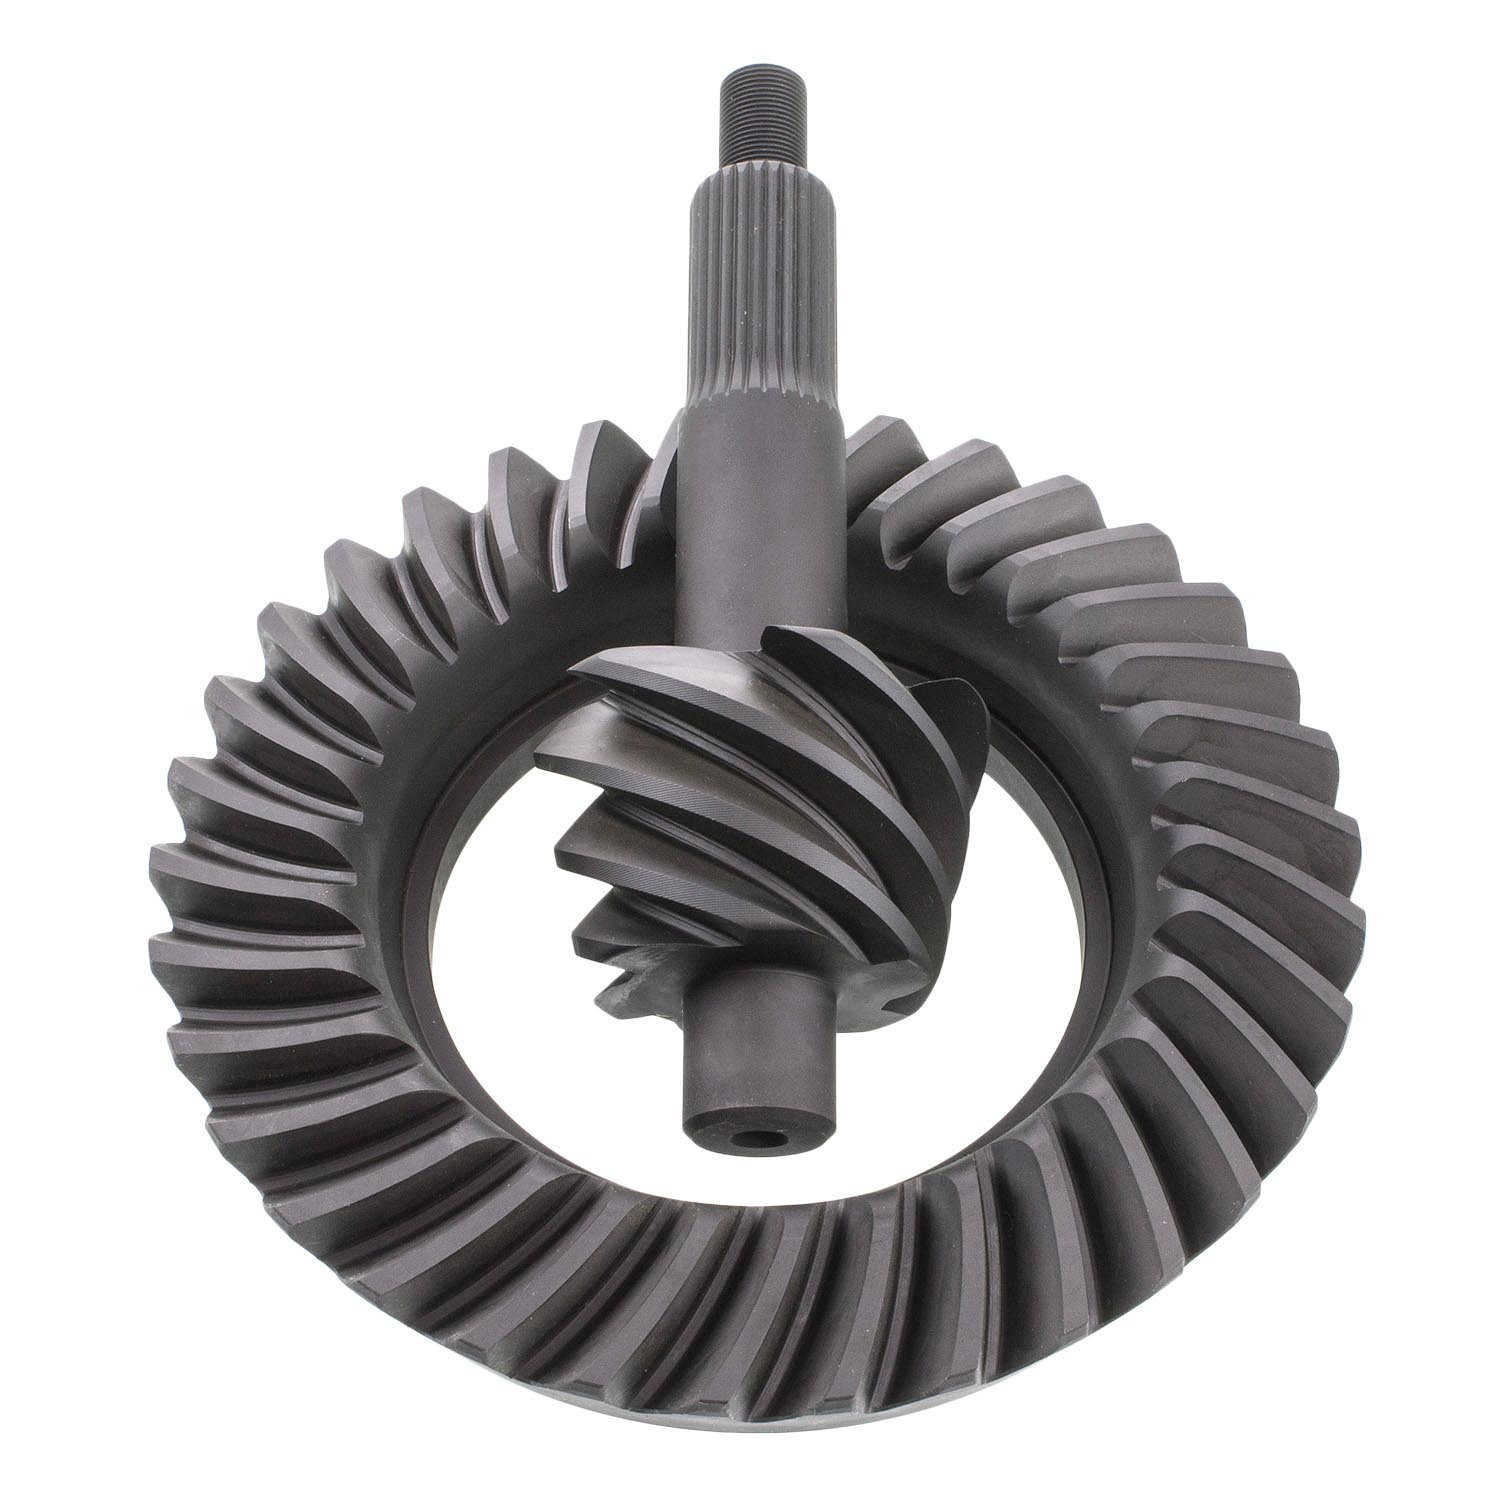 1 Pack Richmond Gear 79-0007-1 Ring and Pinion Ford 9 5.67 Ratio Pro Gear 28 Spline 